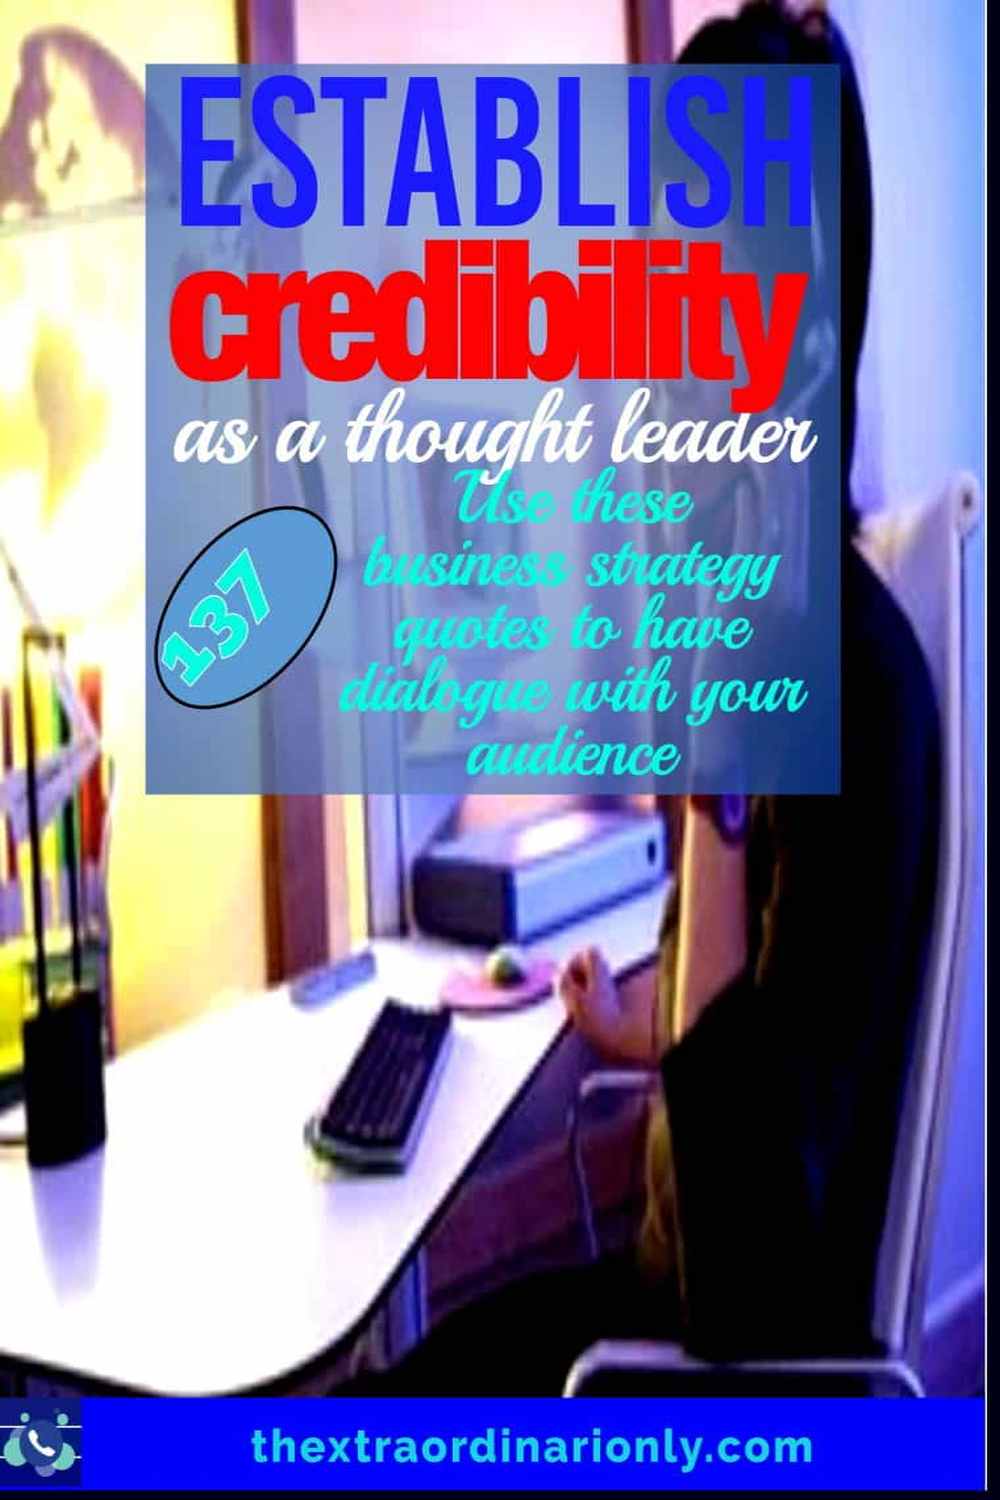 how thextraordinarionly establish credibility as thought leaders with great business strategy quotes